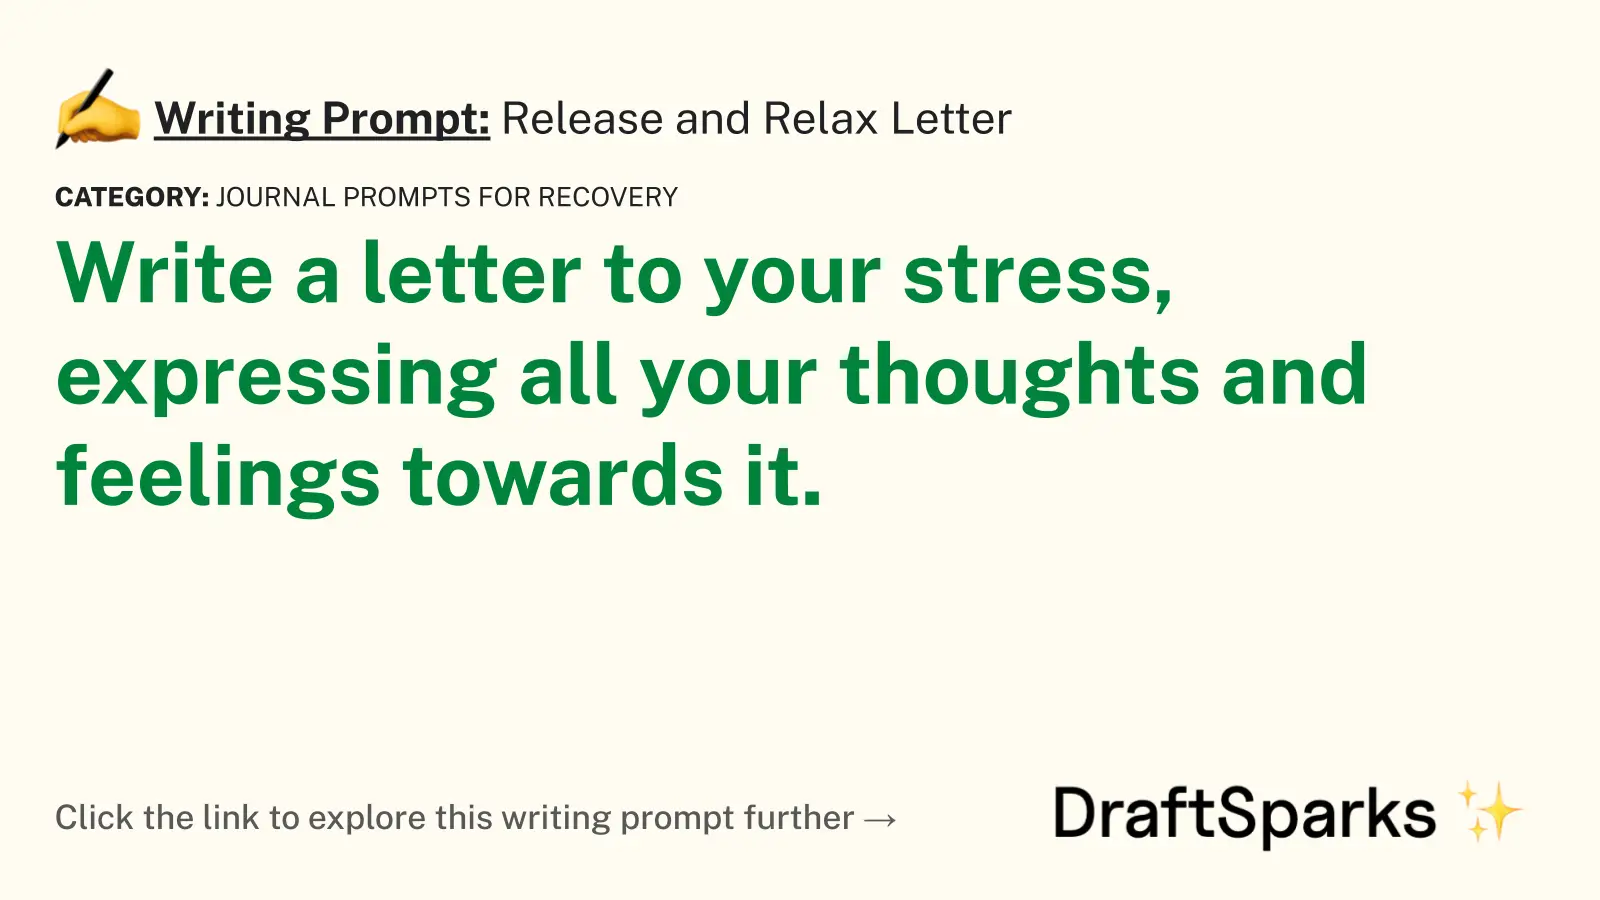 Release and Relax Letter